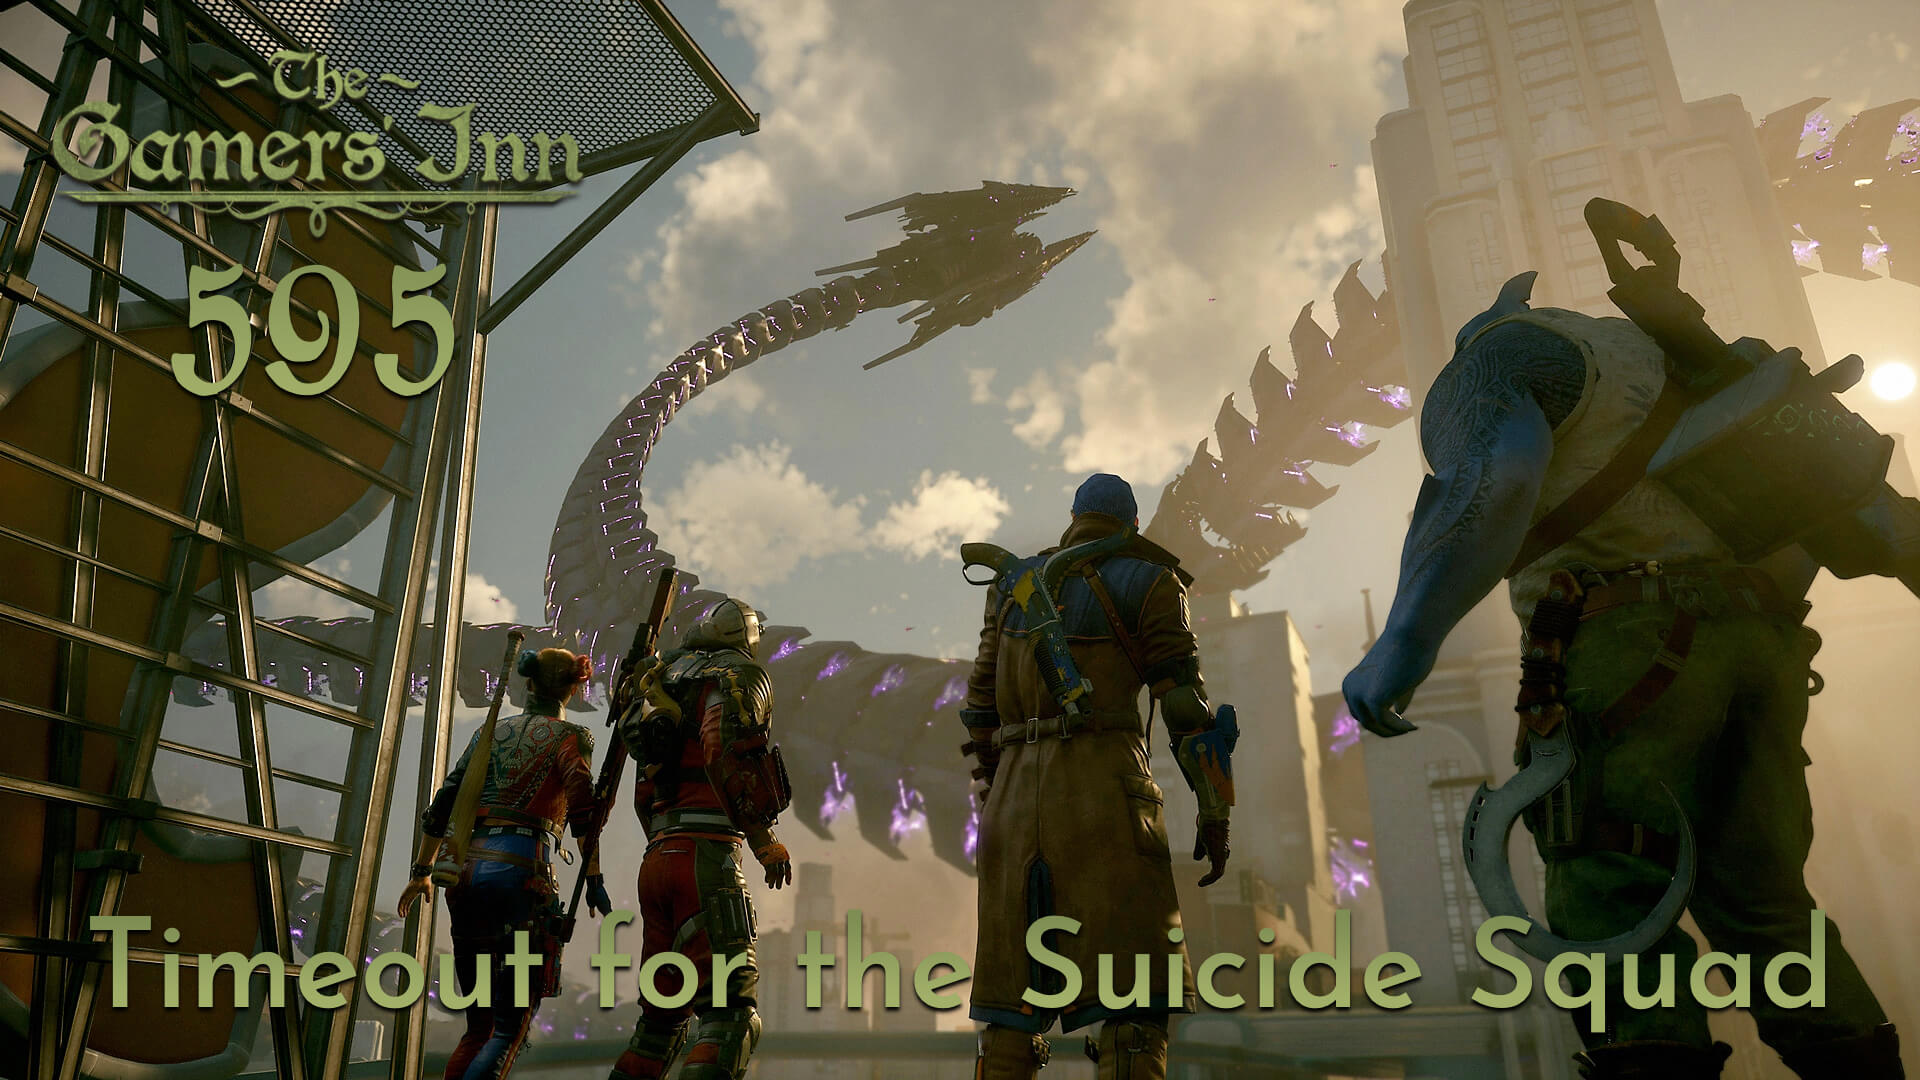 TGI 595 – Timeout for the Suicide Squad